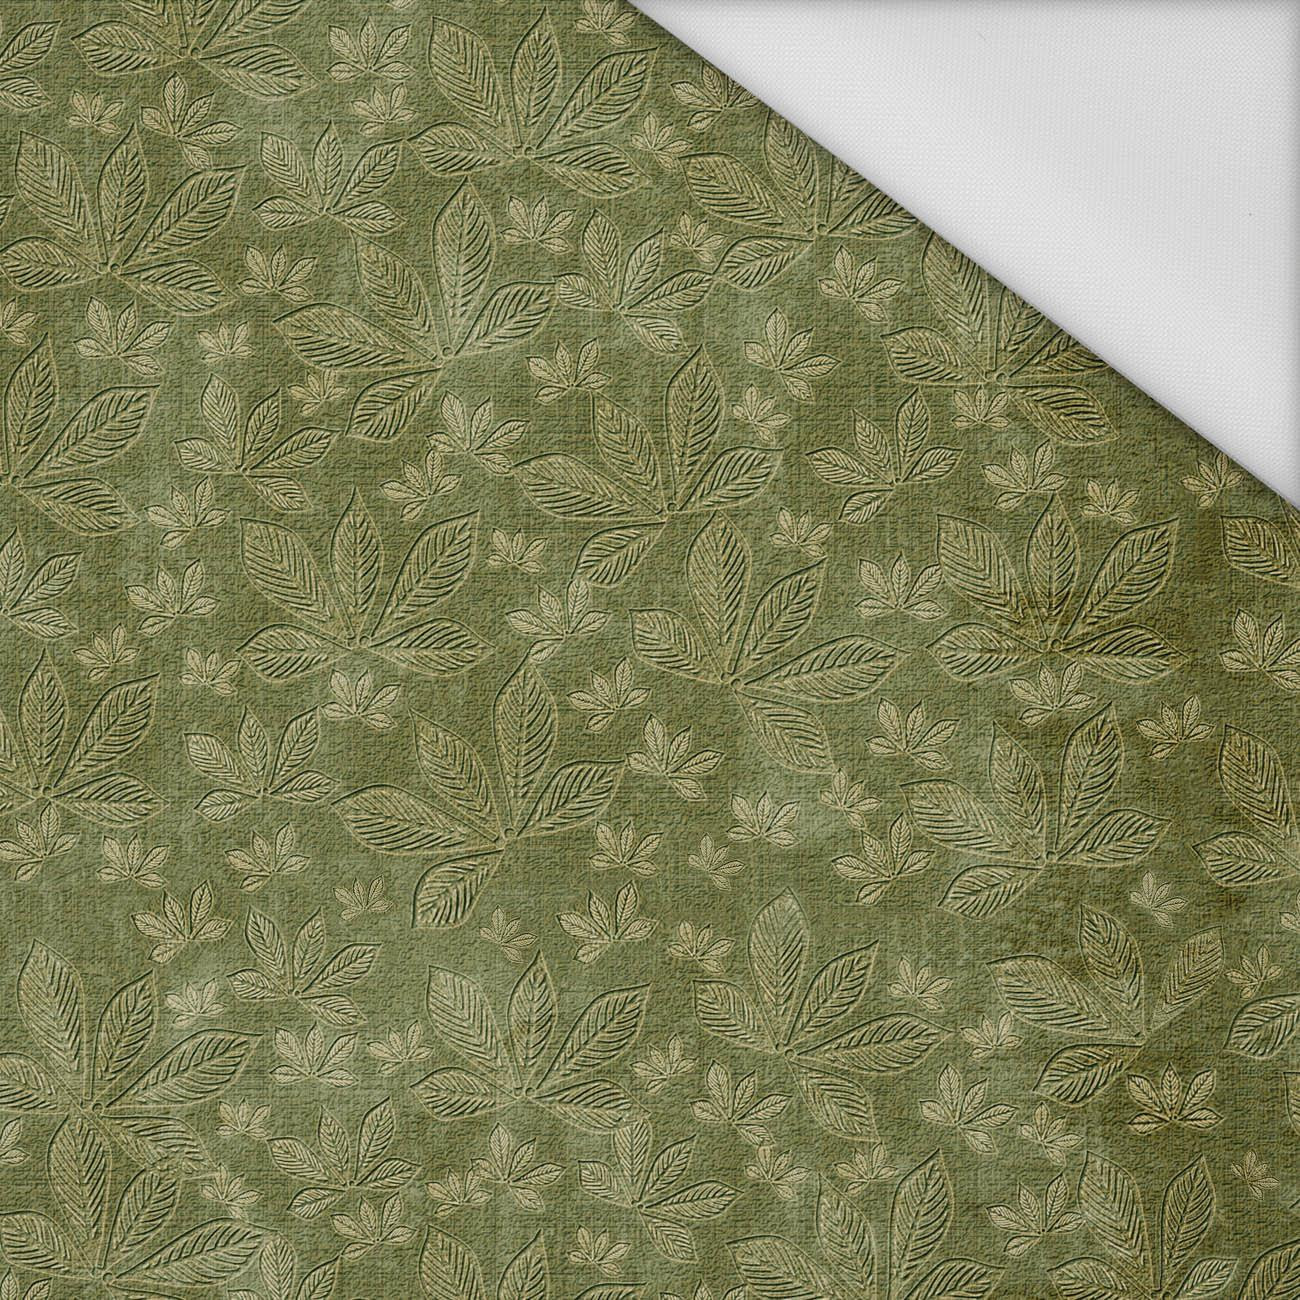 CHESTNUT LEAVES Ms.2 / green (AUTUMN COLORS) - Waterproof woven fabric